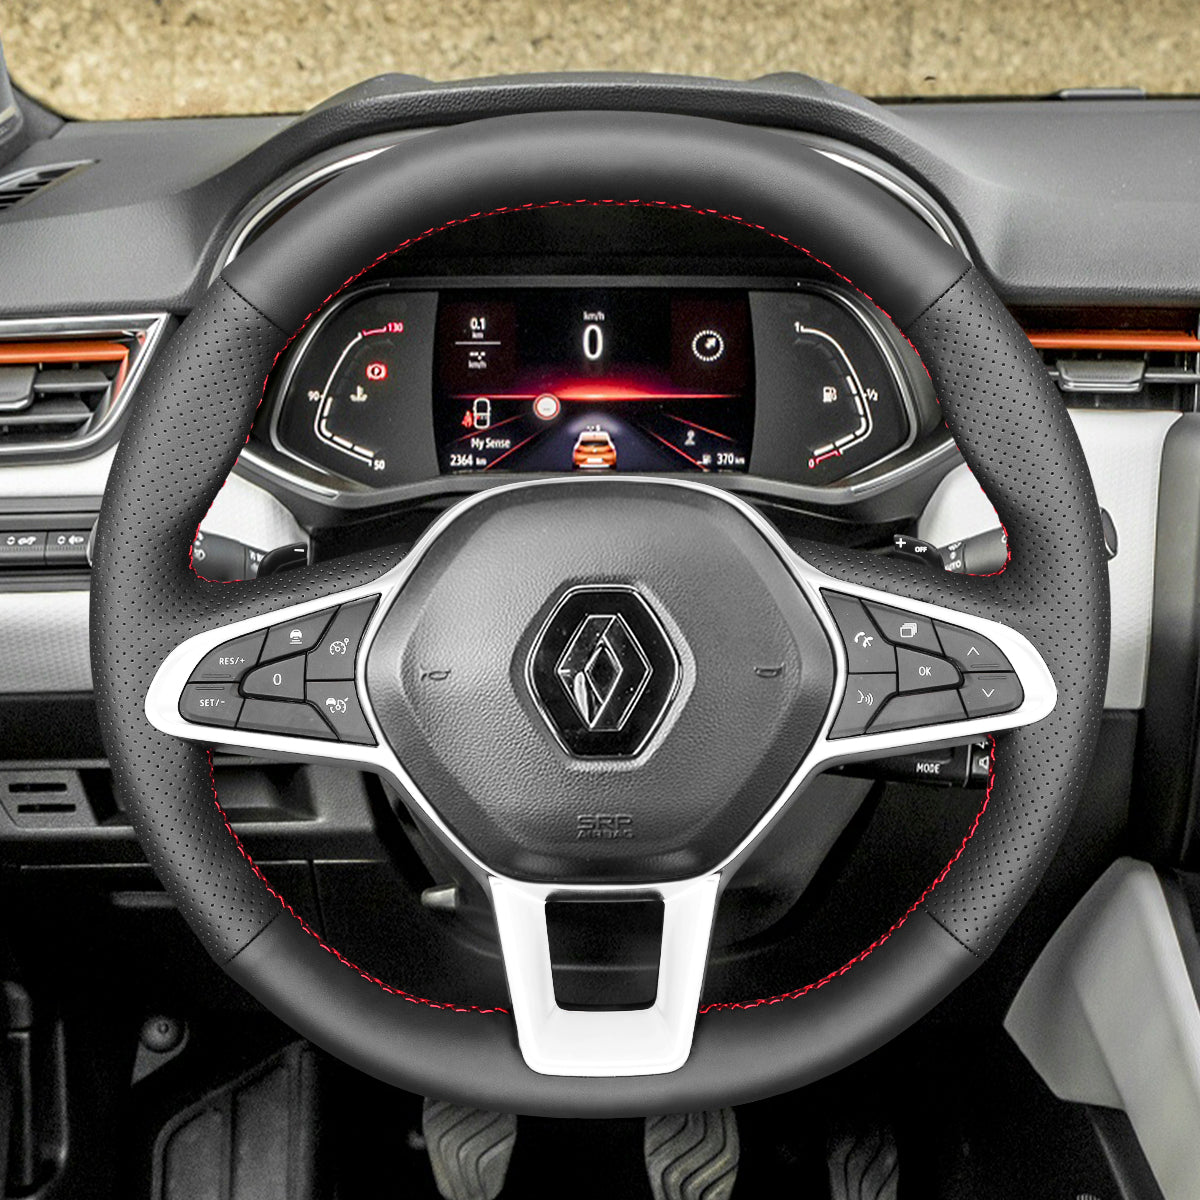 MEWANT Hand Stitch Black Suede Leather Car Steering Wheel Cover for Renault Clio 5 (V) 2019-2020 / Captur 2 2020 / Zoe 2020